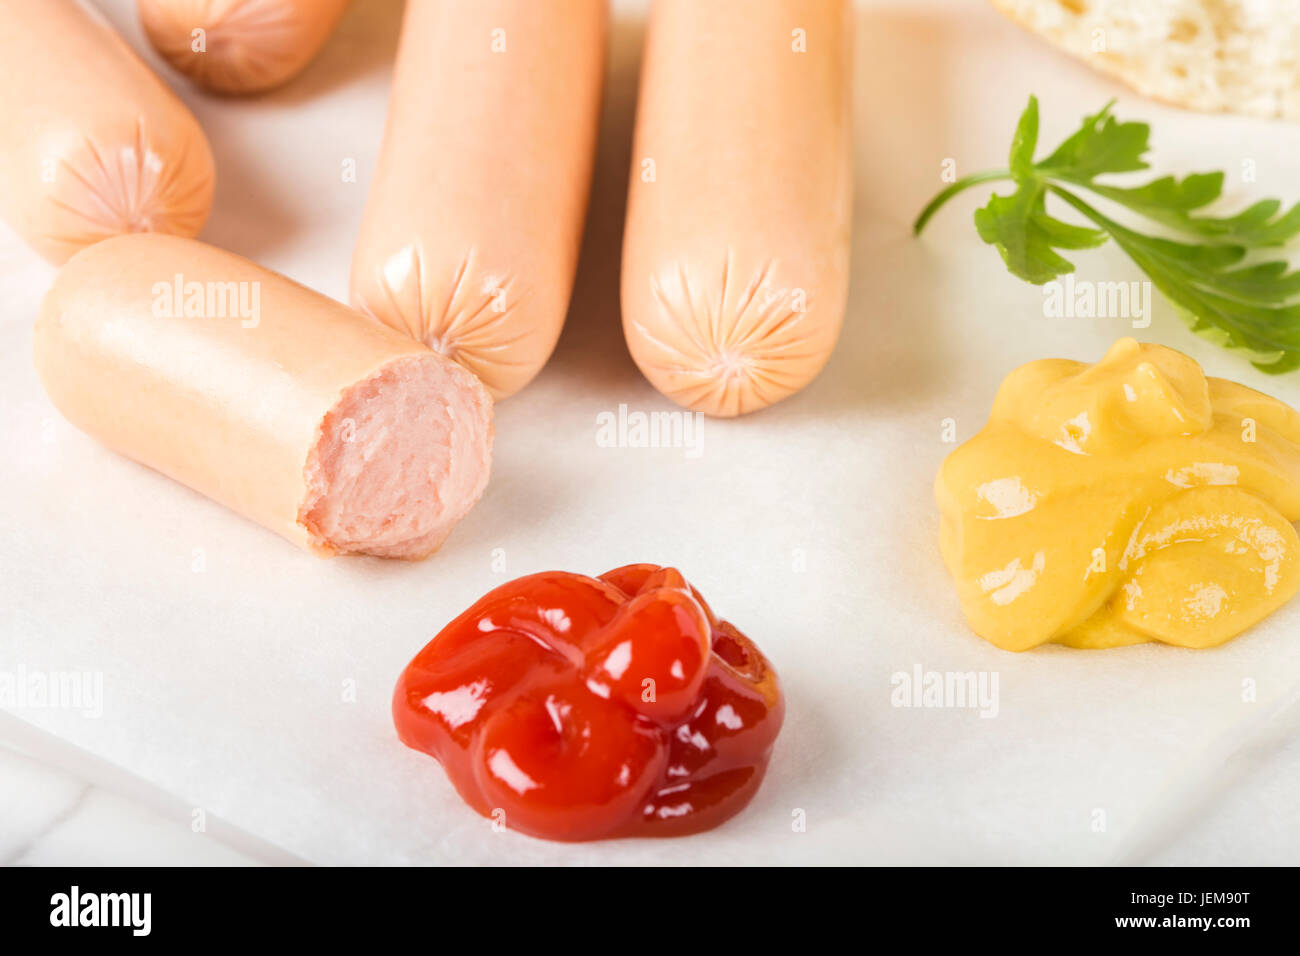 Sausages (Frankfurter) on paper with bread, mustard and ketchup Stock Photo